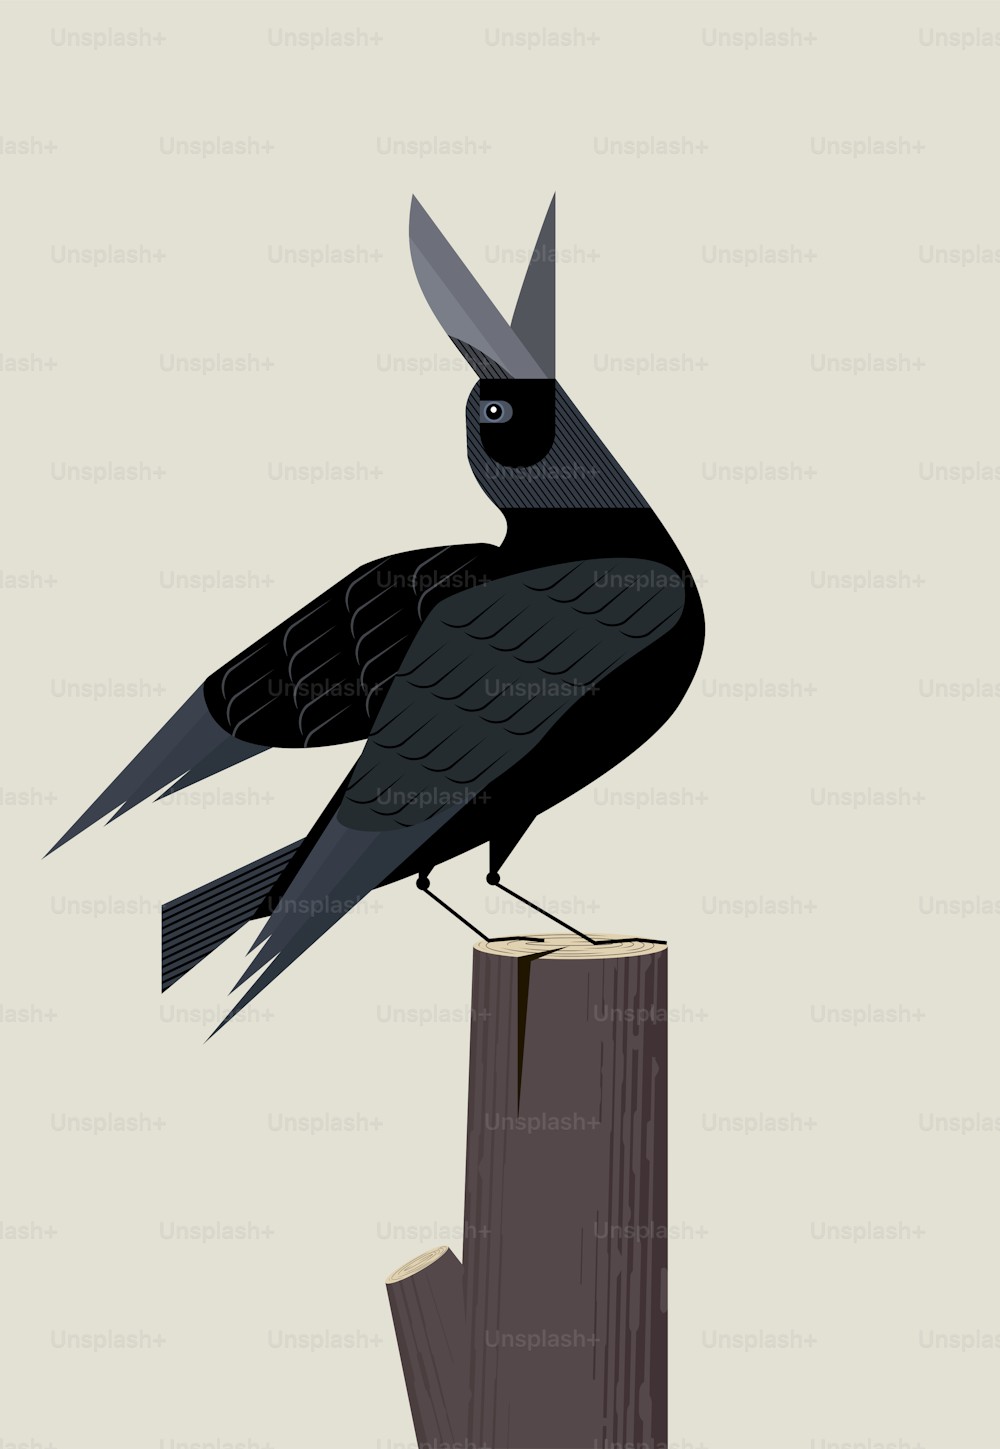 Black crow sits on a tree stump and sings inspired, minimalist image